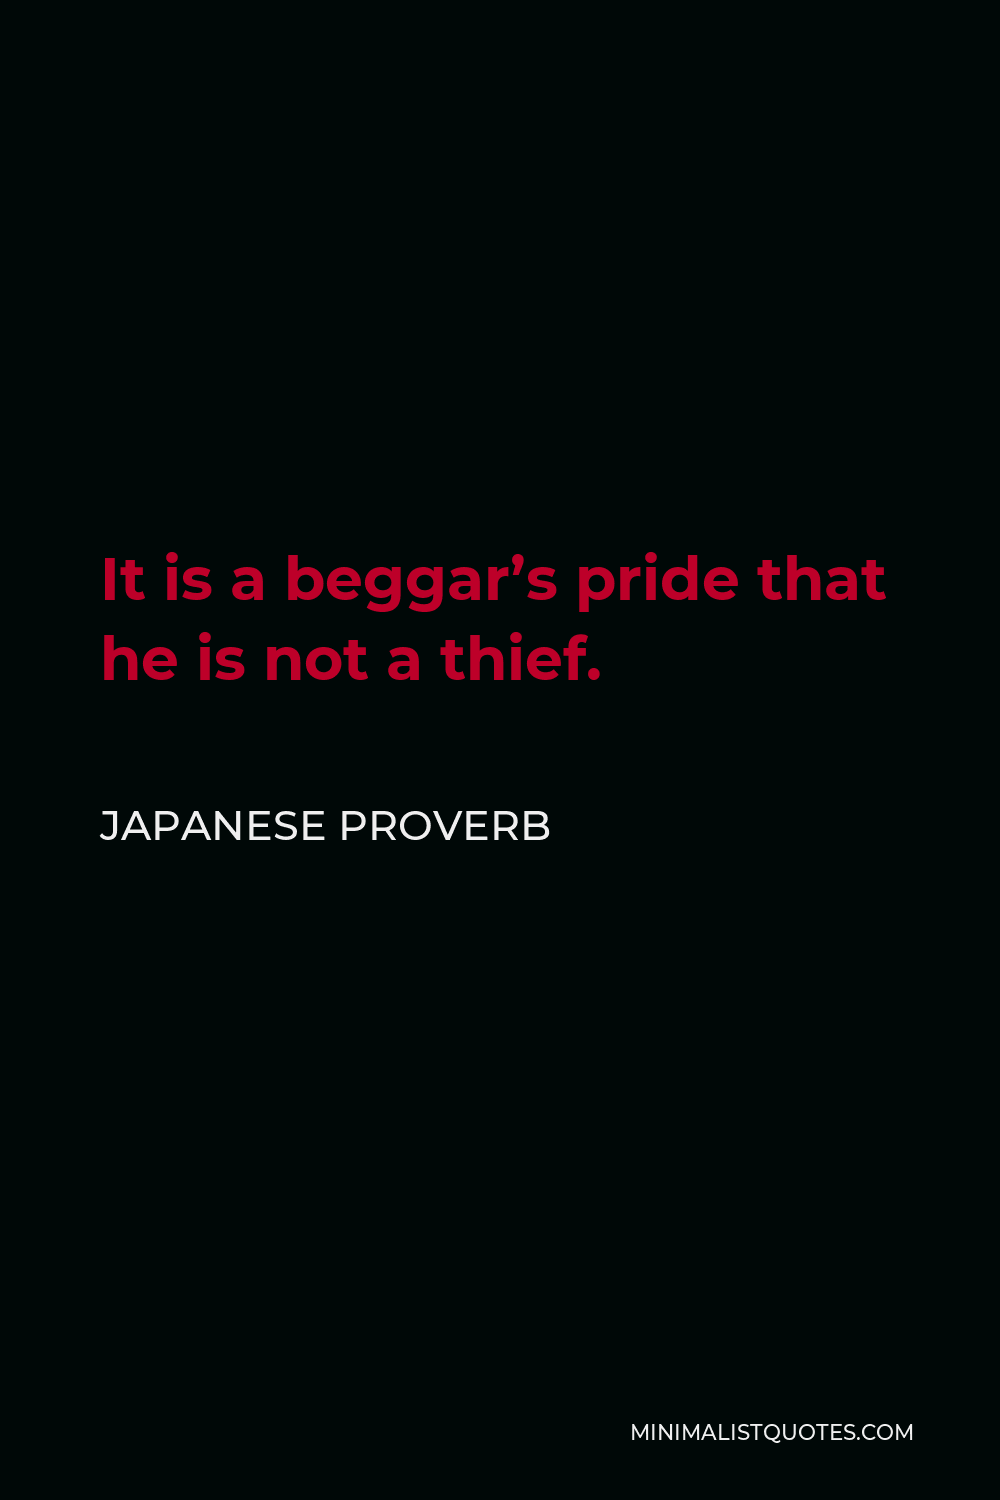 Japanese Proverb Quote - It is a beggar’s pride that he is not a thief.